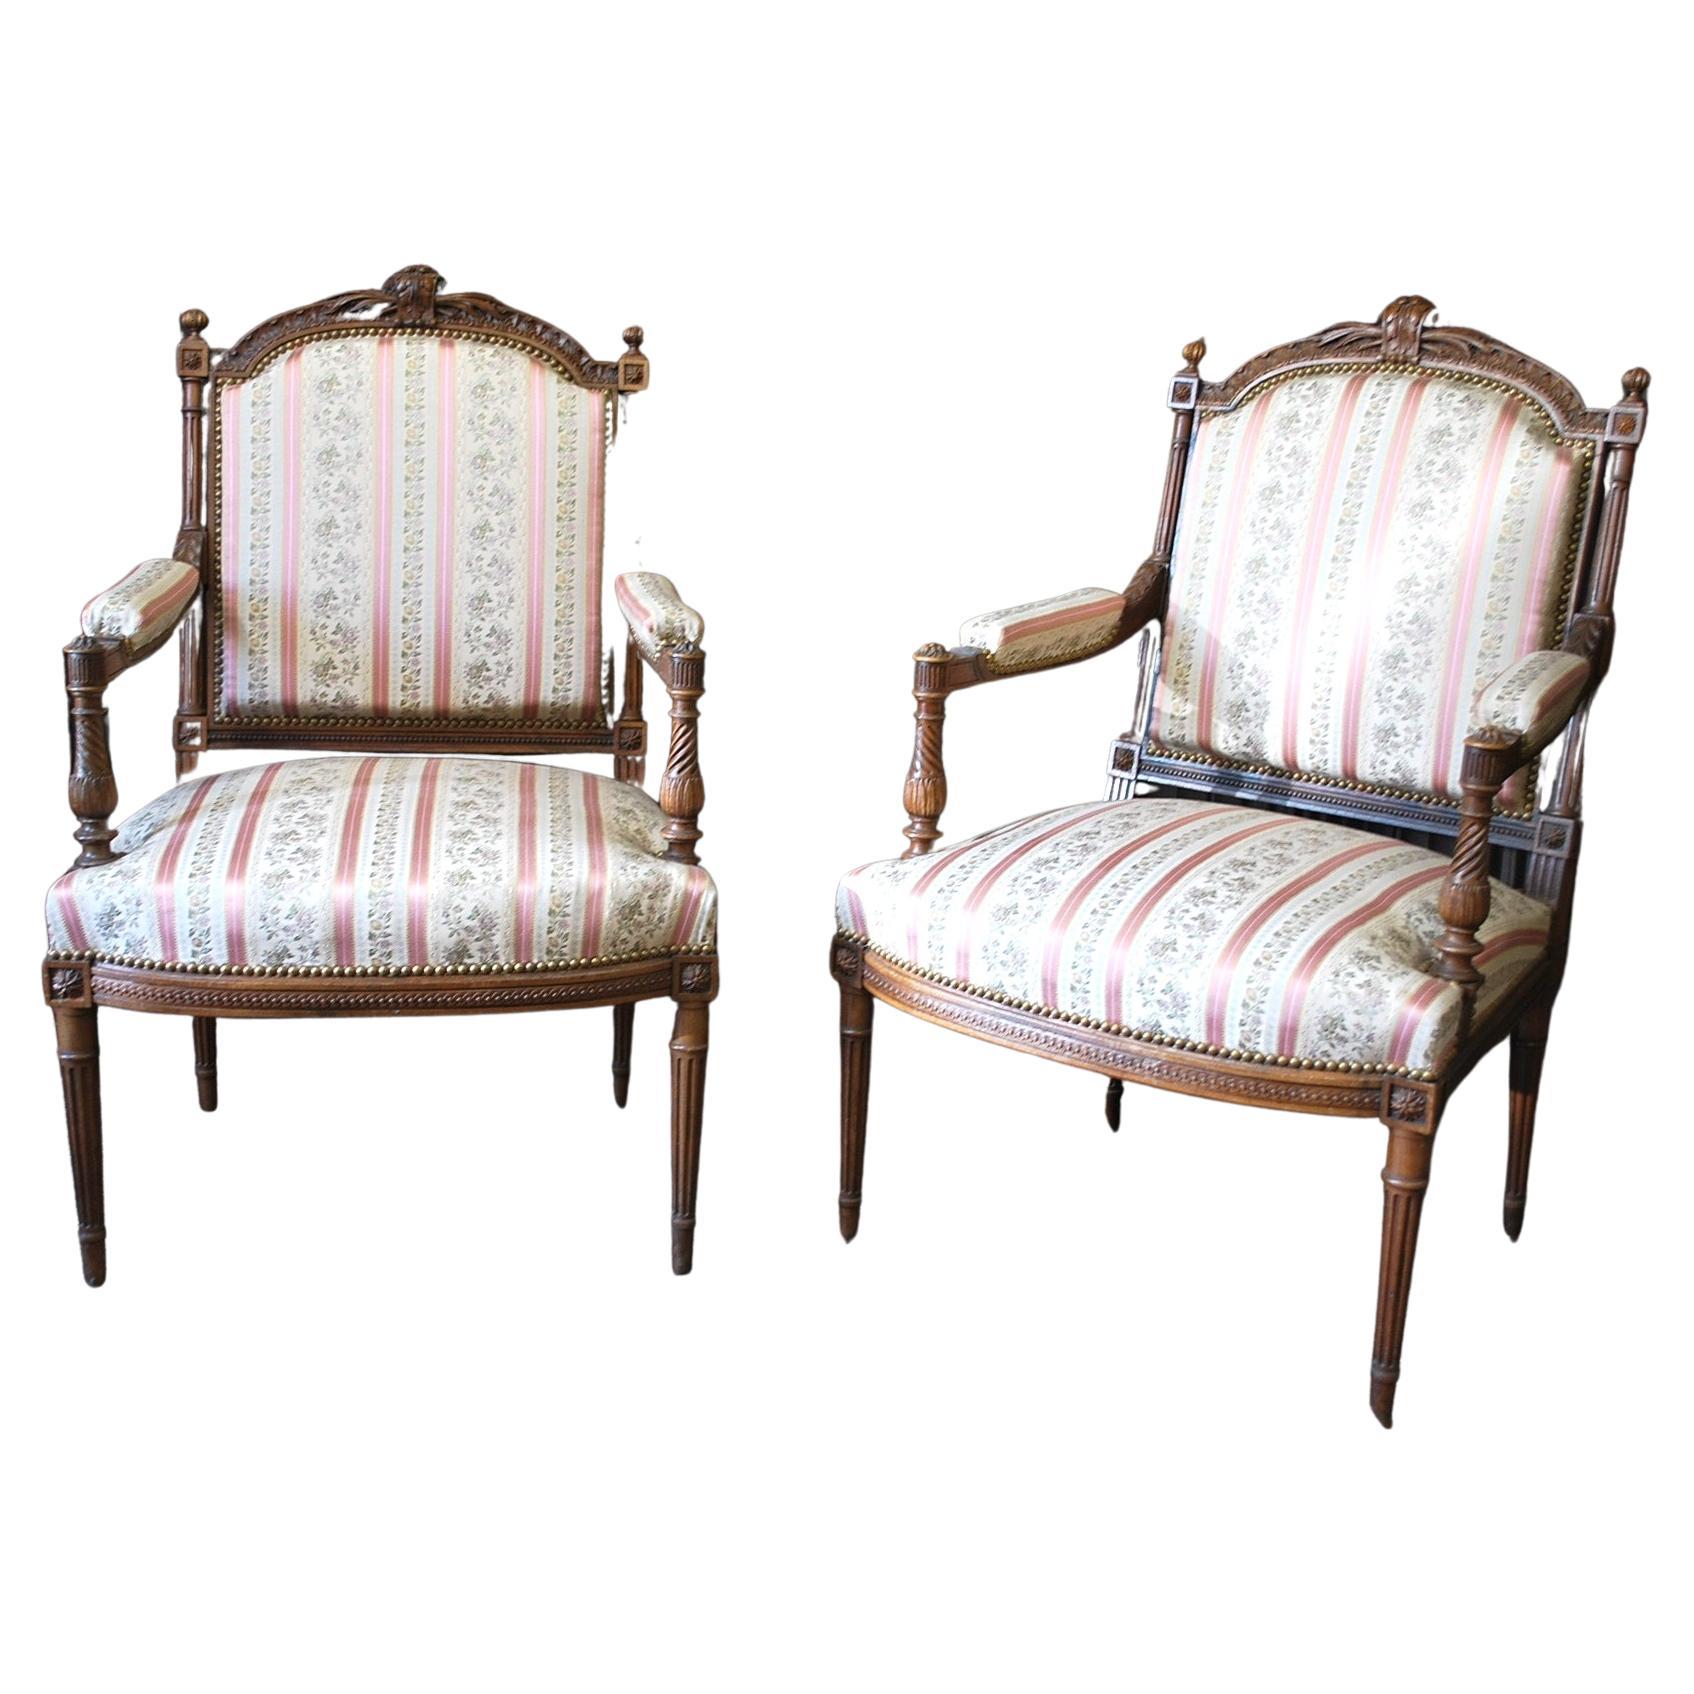 Hutton-Clarke Antiques is delighted to present an exquisite pair of Antique French Henri II Walnut Armchairs, dating back to approximately 1890. These chairs are a testament to the impeccable craftsmanship of their era, showcasing exceptional